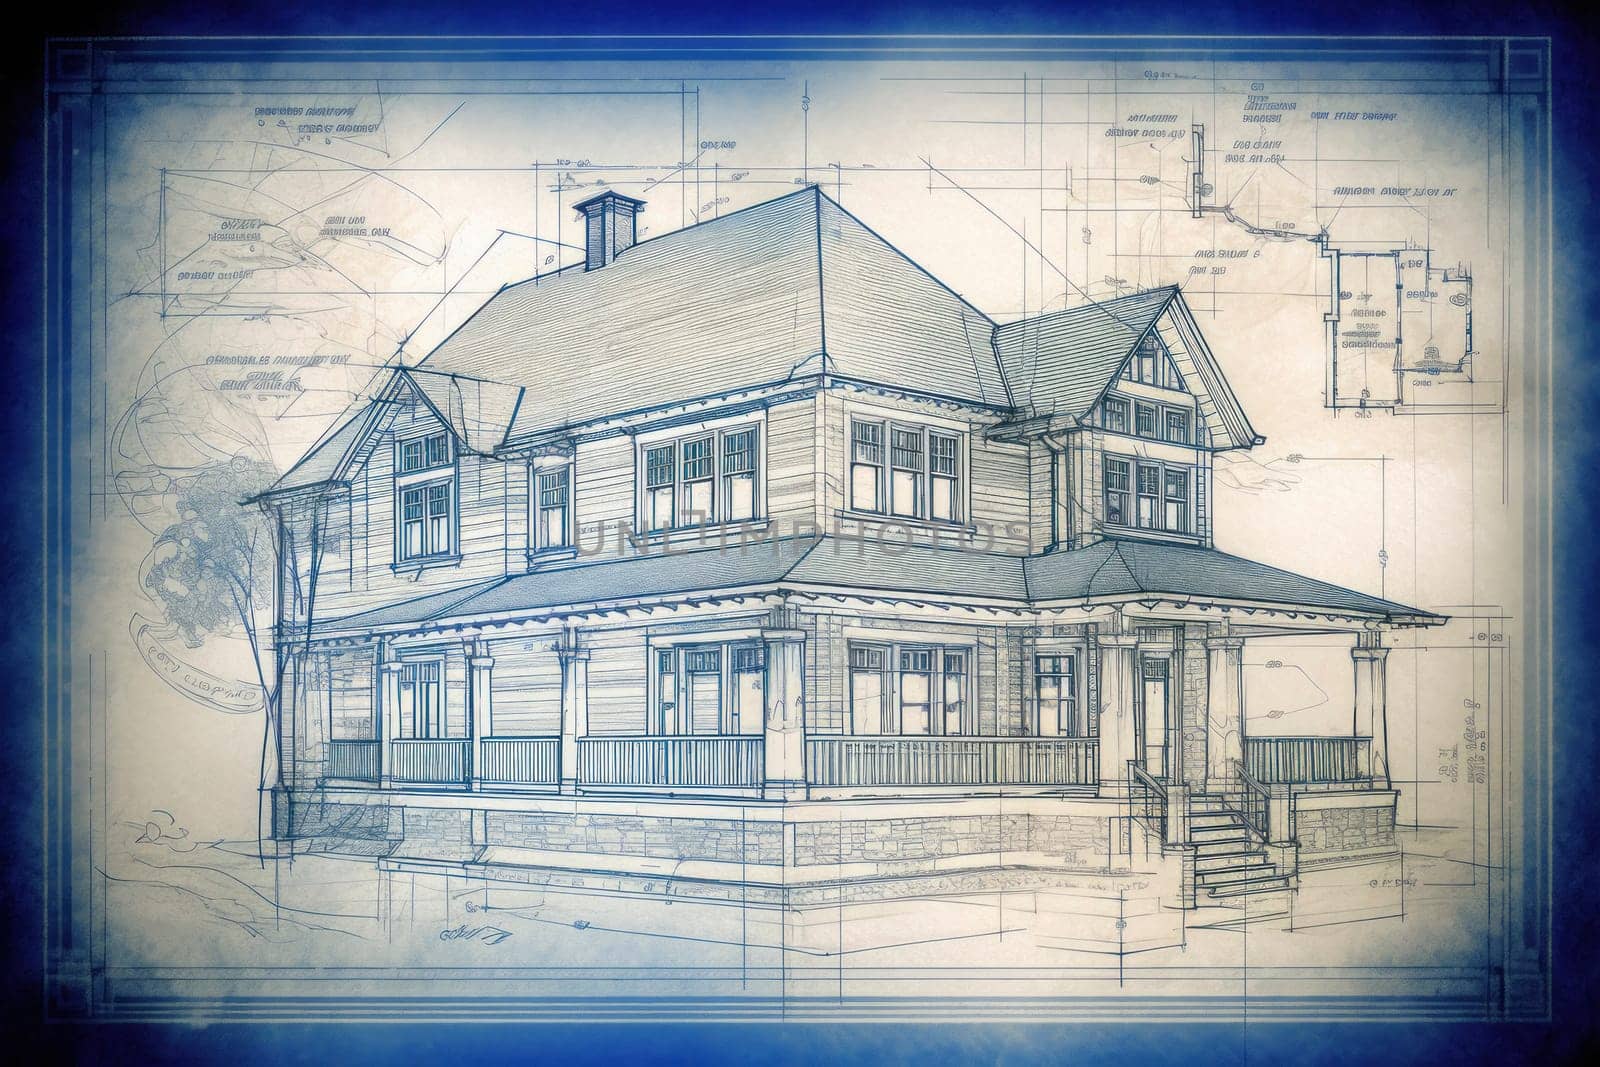 An artistic representation of house blueprints with detailed architectural design, evoking a vintage aesthetic.